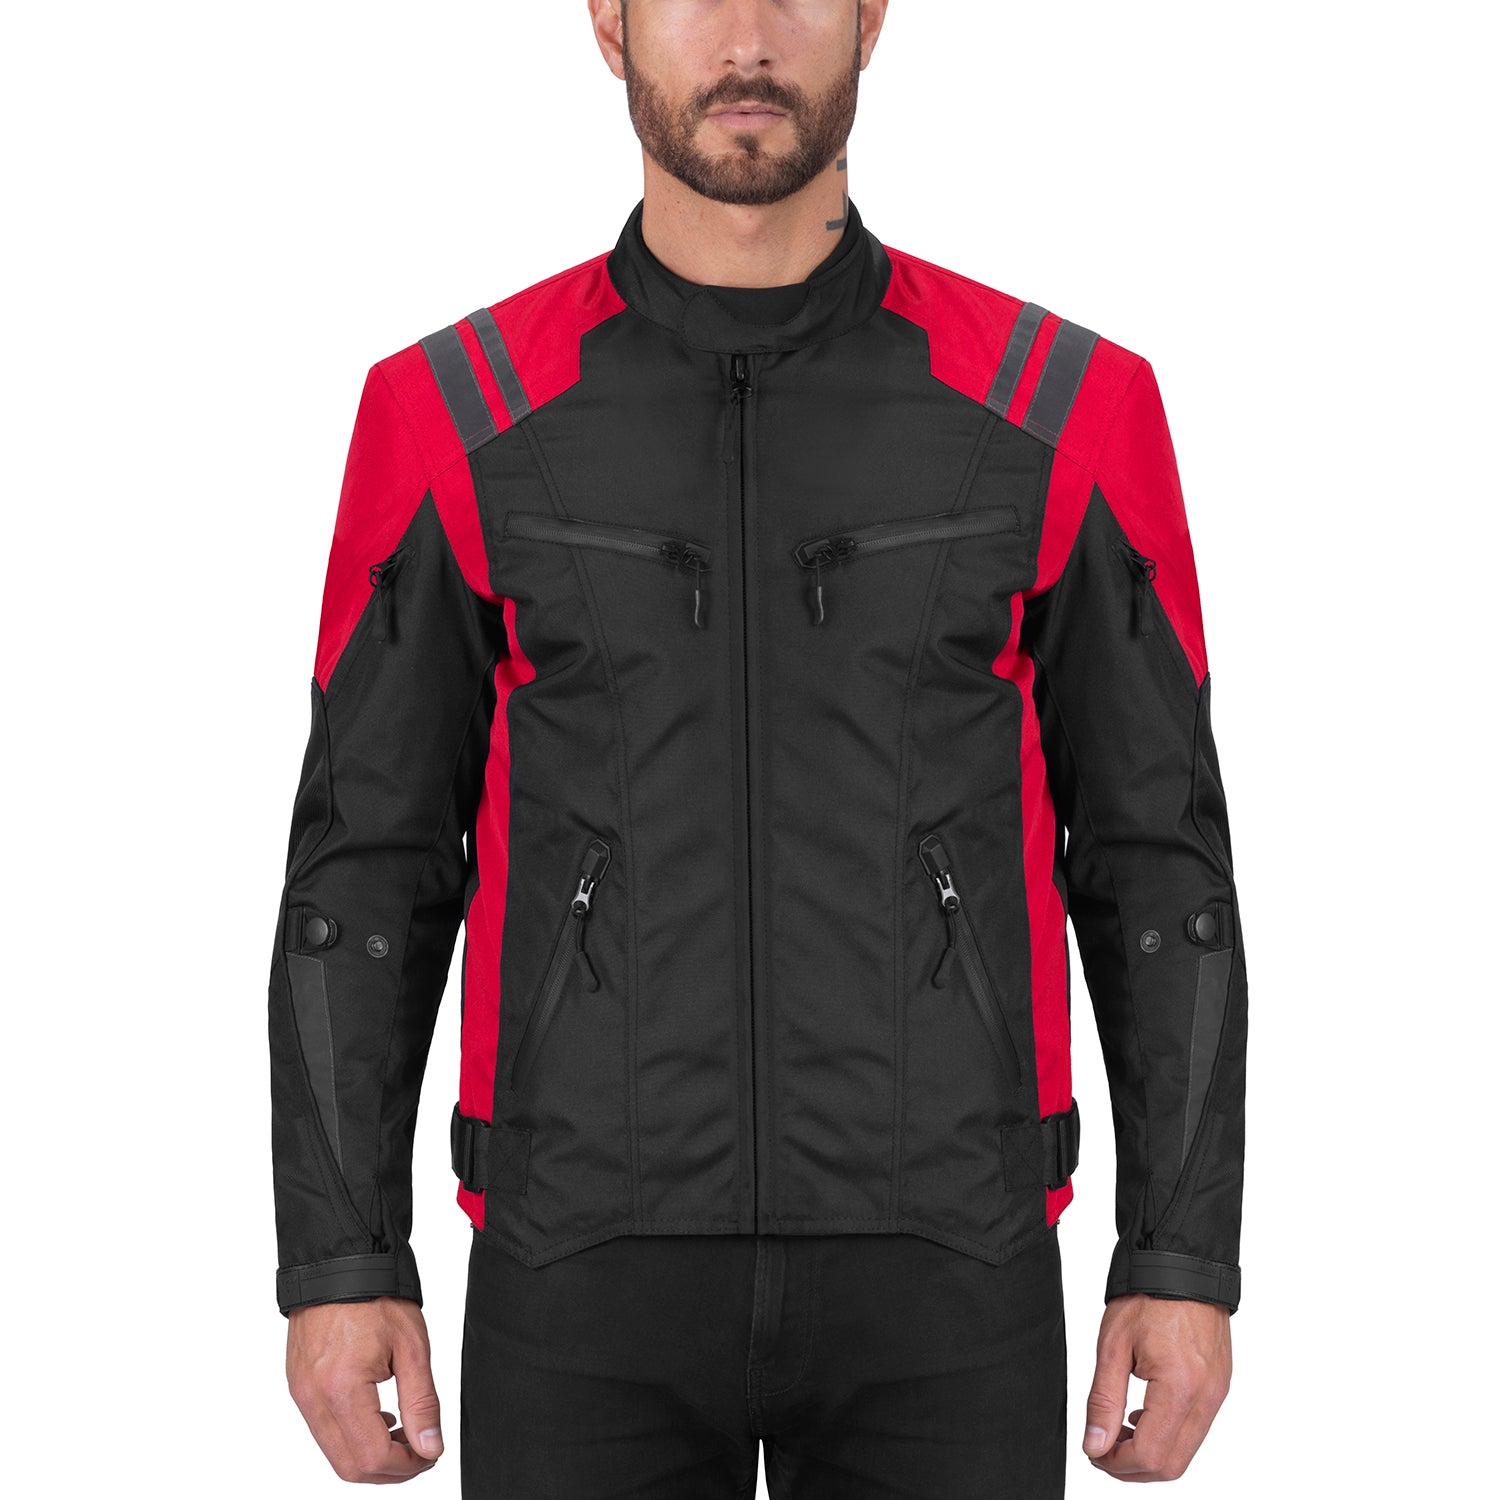 Textile Vikingcycle Find Biker Viking Jacket – Red Quality â€“ Cycle Ironborn